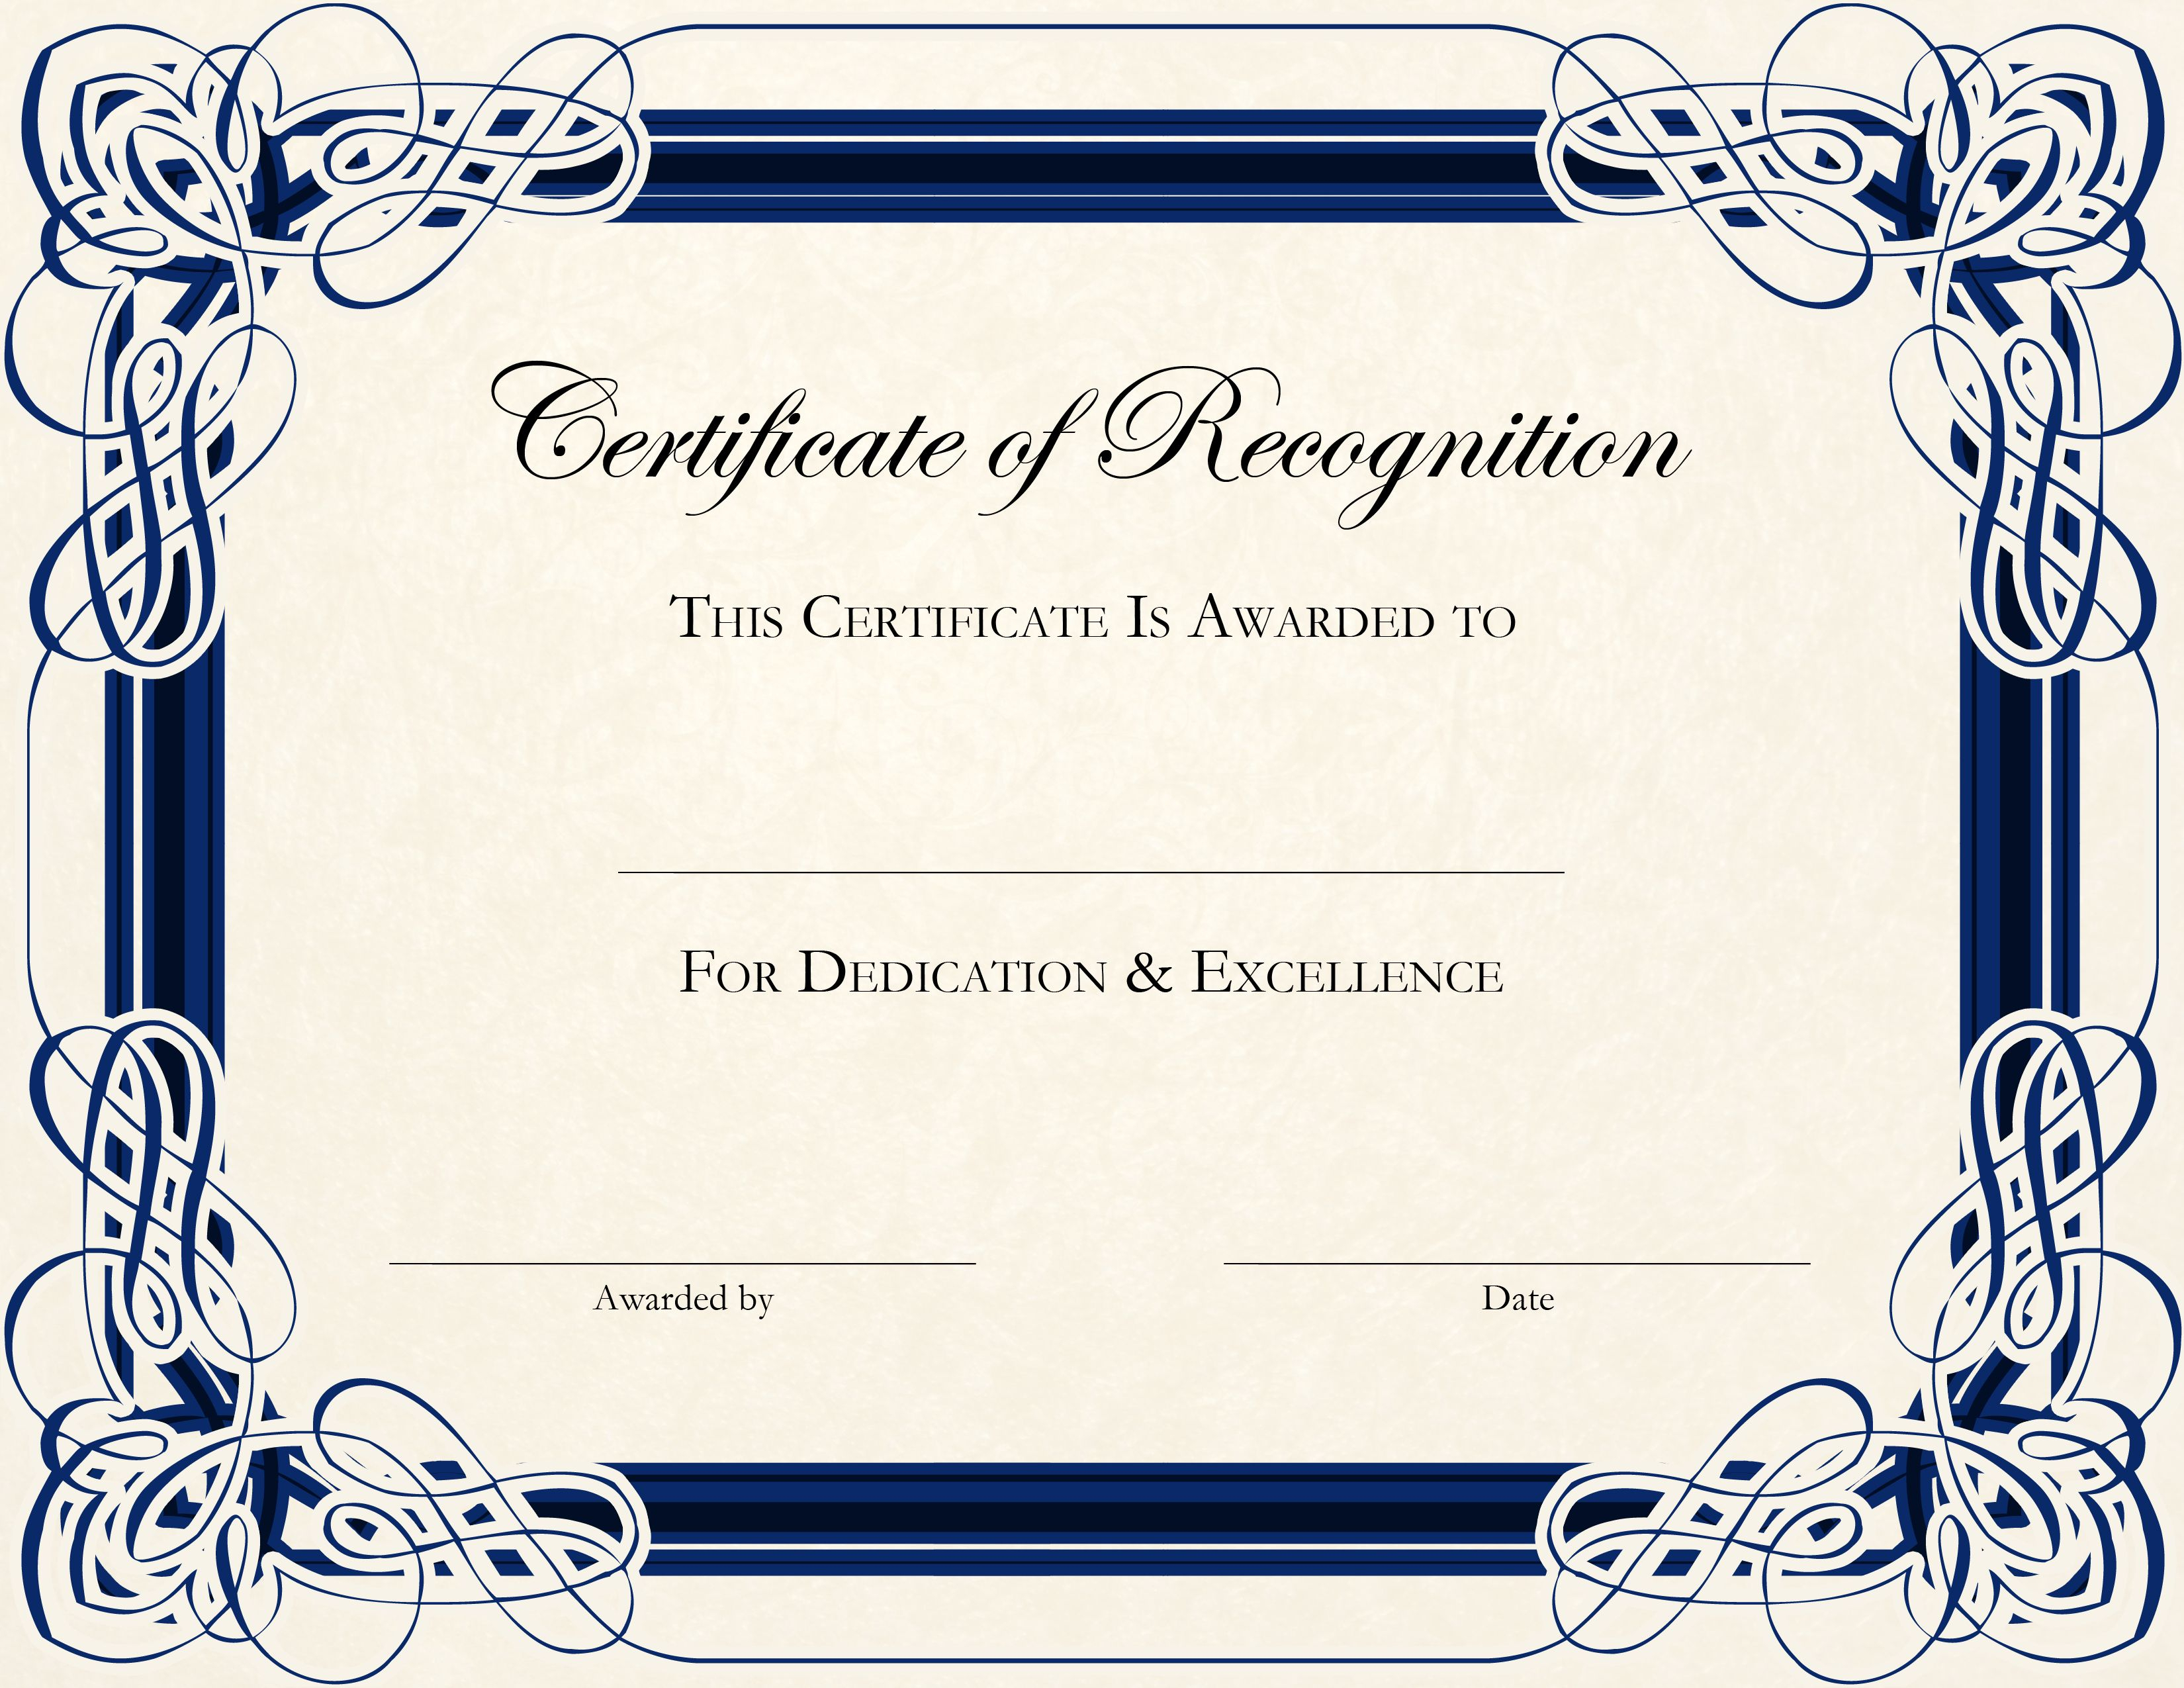 Certificate Template Designs Recognition Docs | Blankets Intended For Certificate Of Recognition Word Template